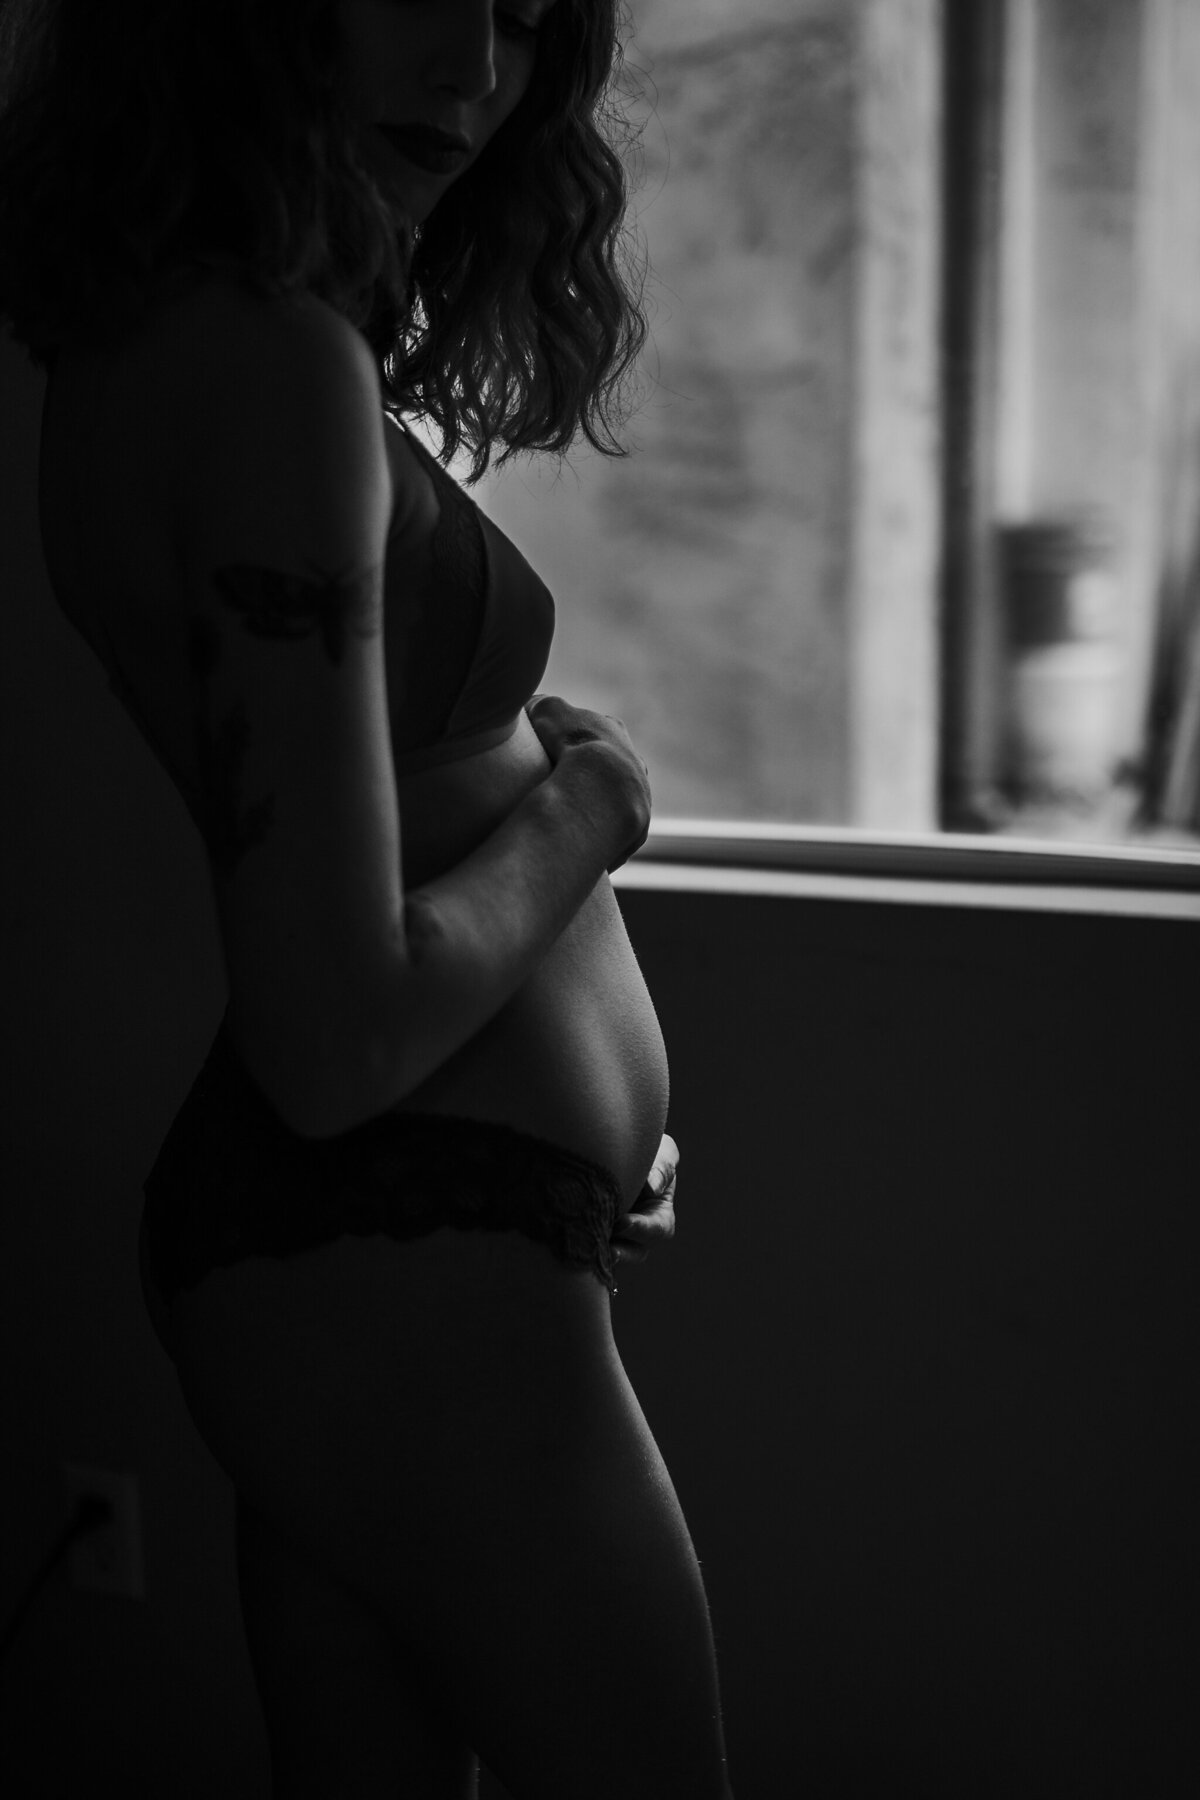 Capture the glow of your pregnancy with maternity portraits in Minneapolis. Shannon Kathleen Photography turns this moment into timeless art. Book your session today!